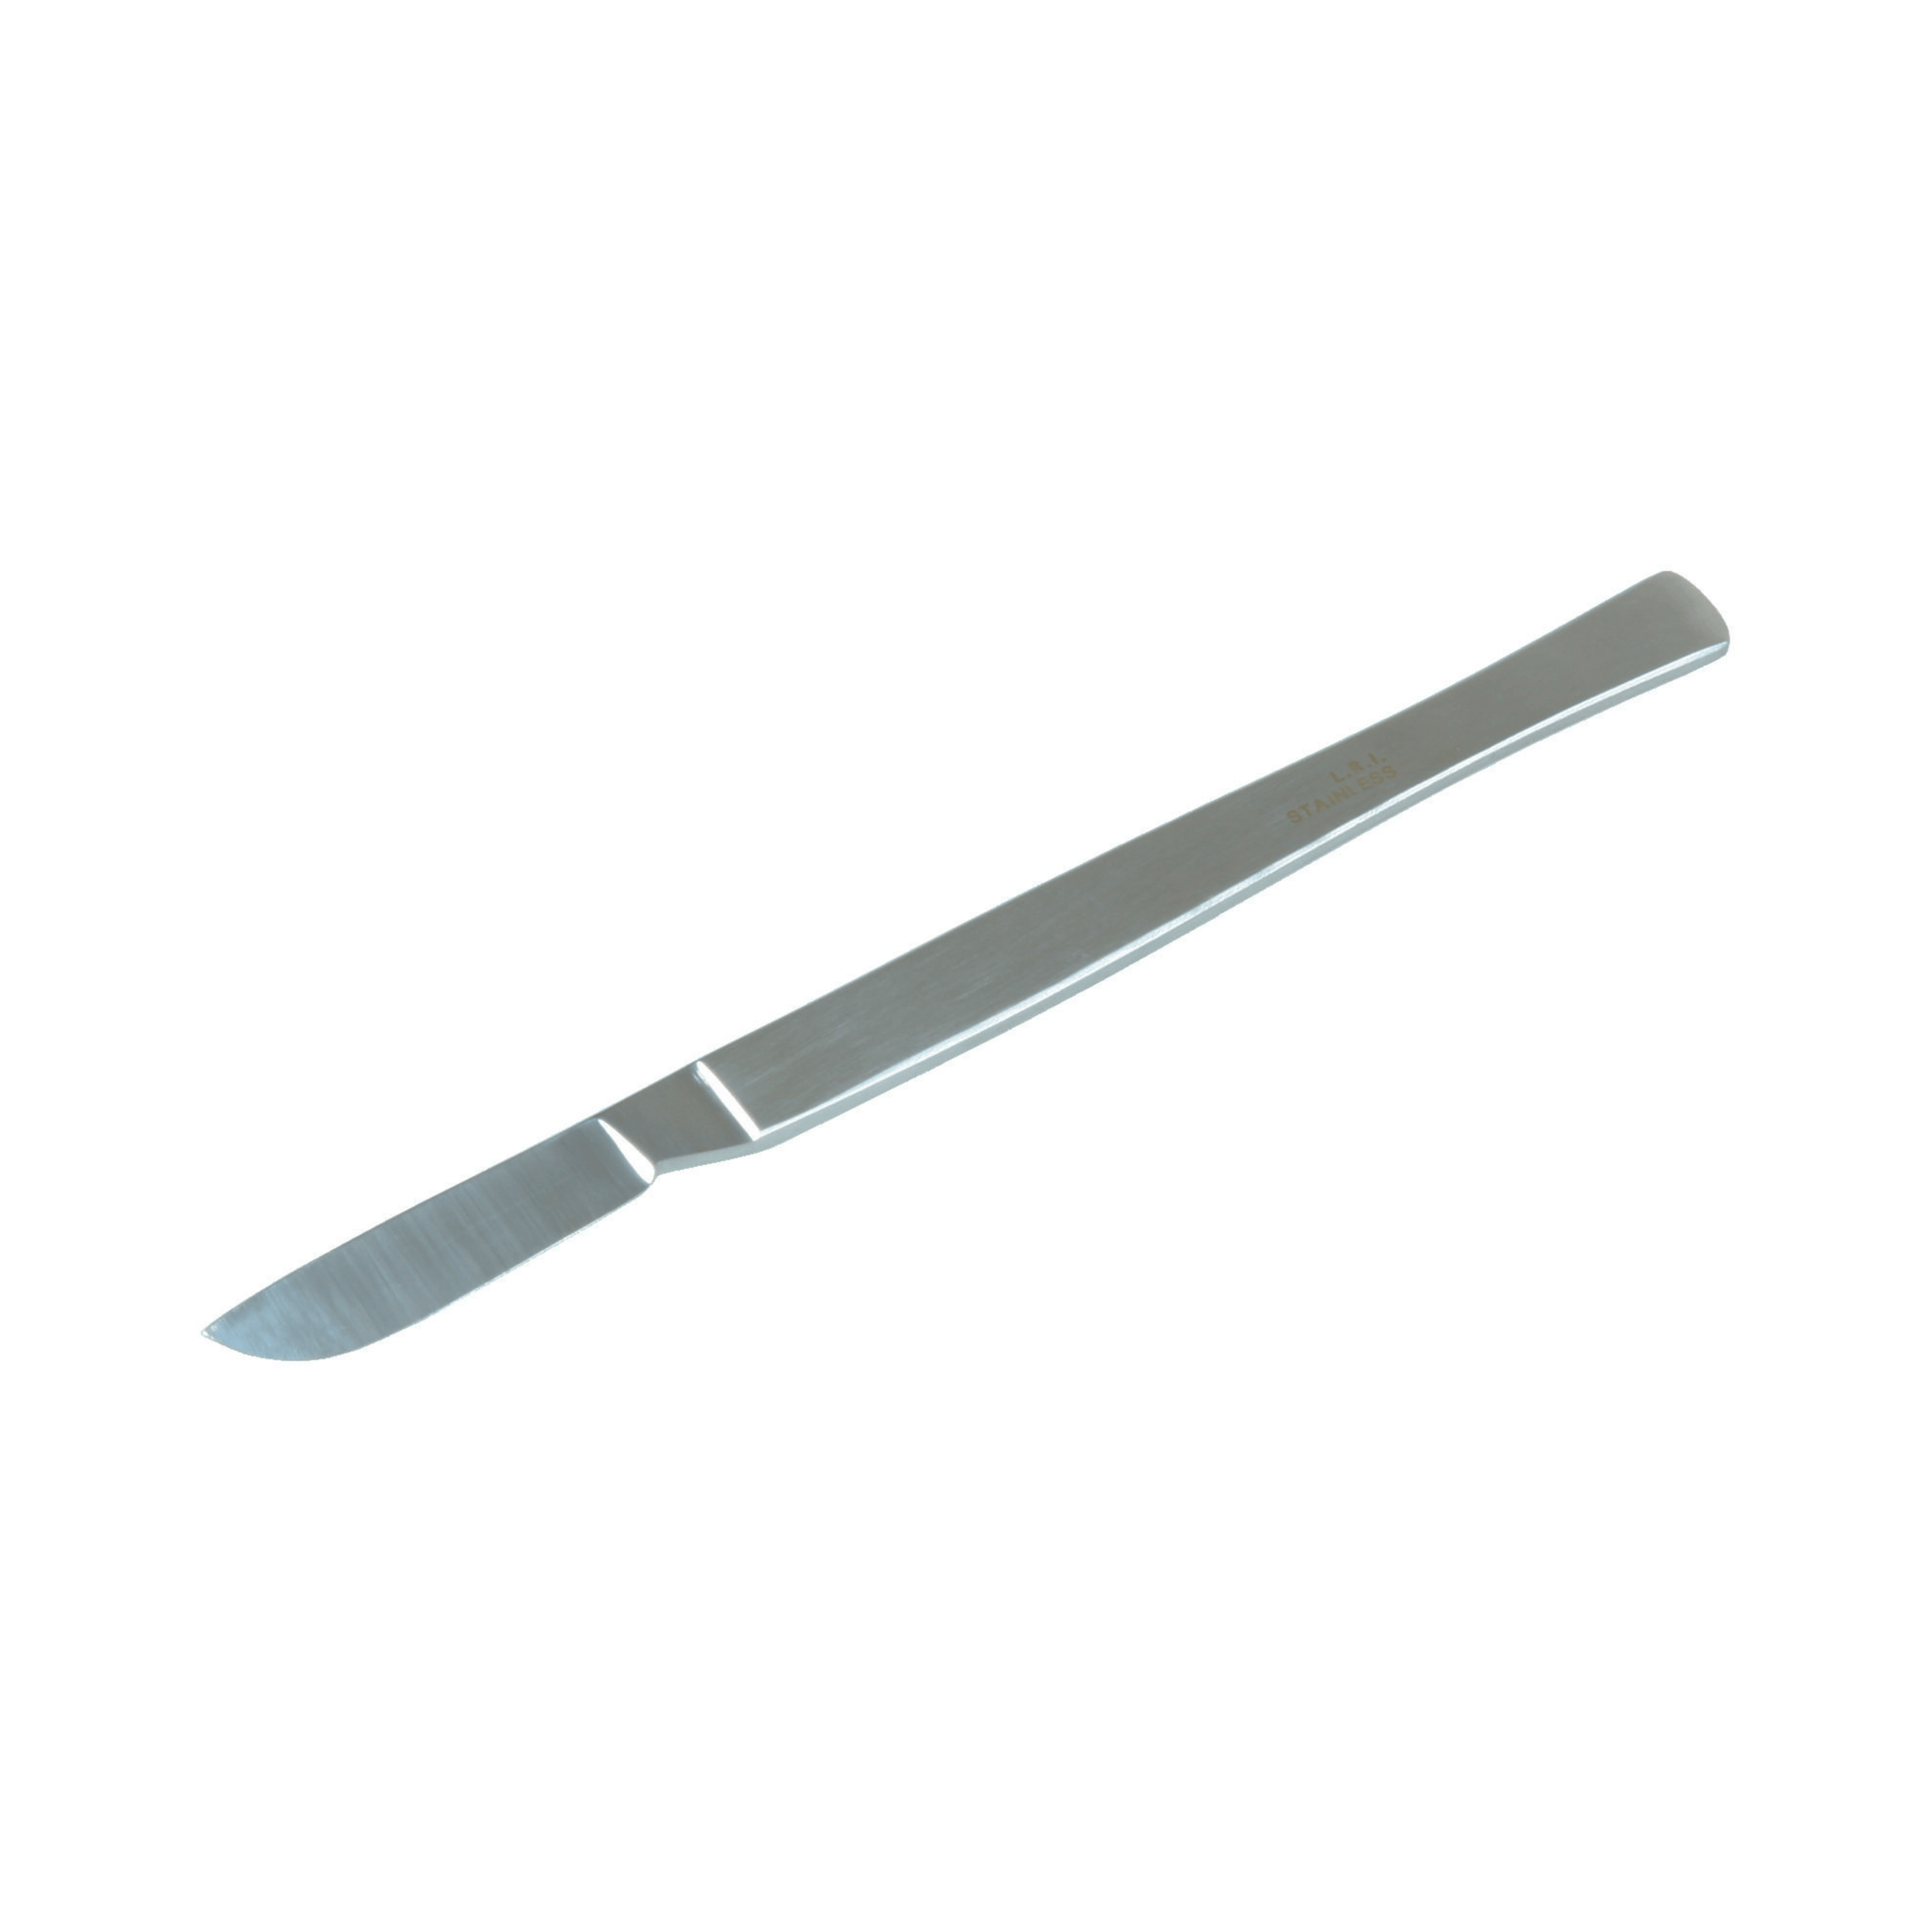 Solid Forged Scalpel- 4 cm Blade